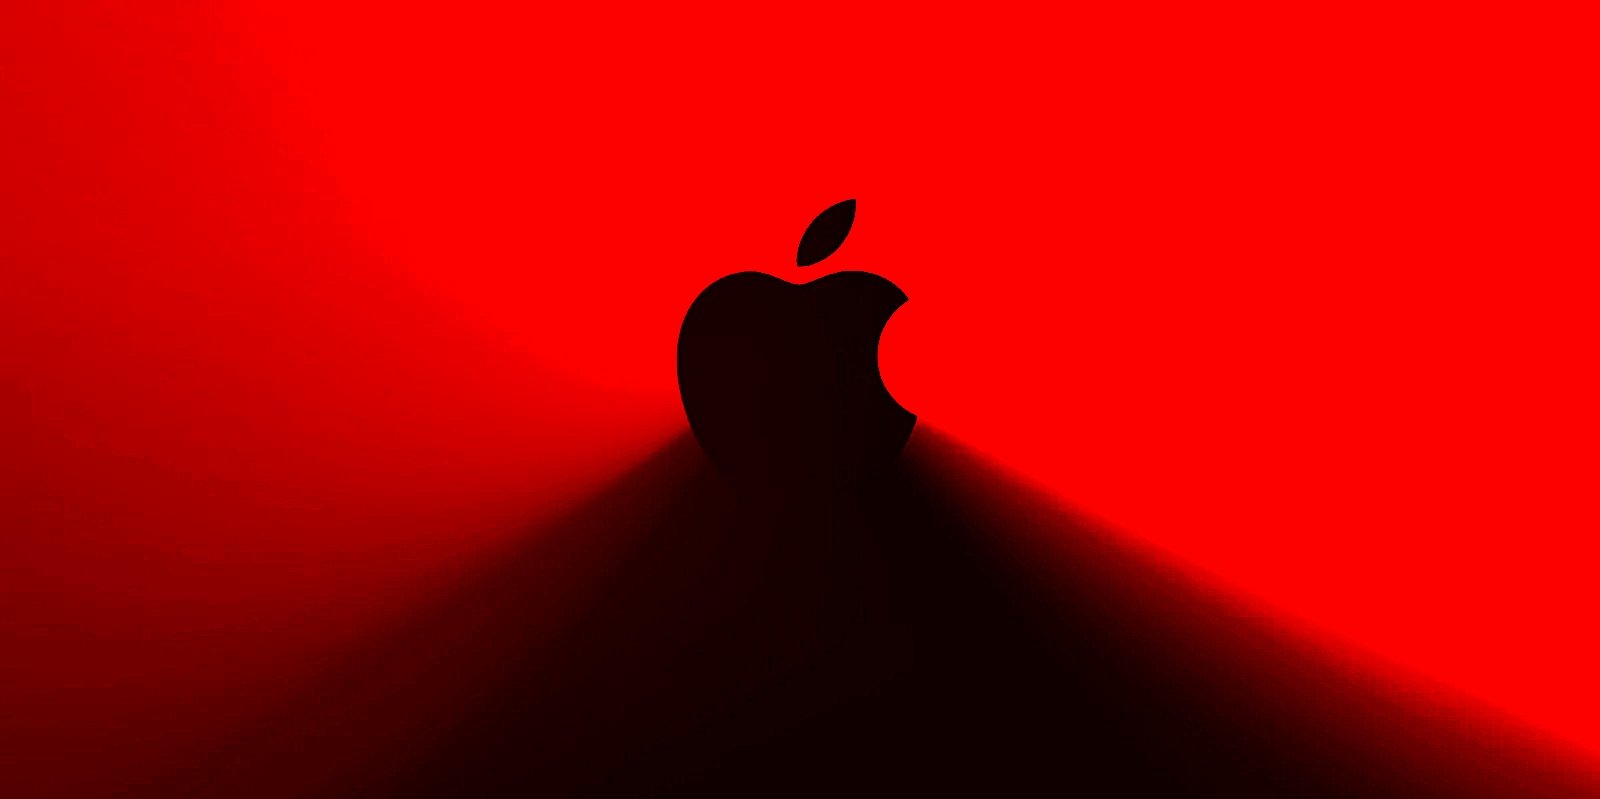 Apple logo on a red background